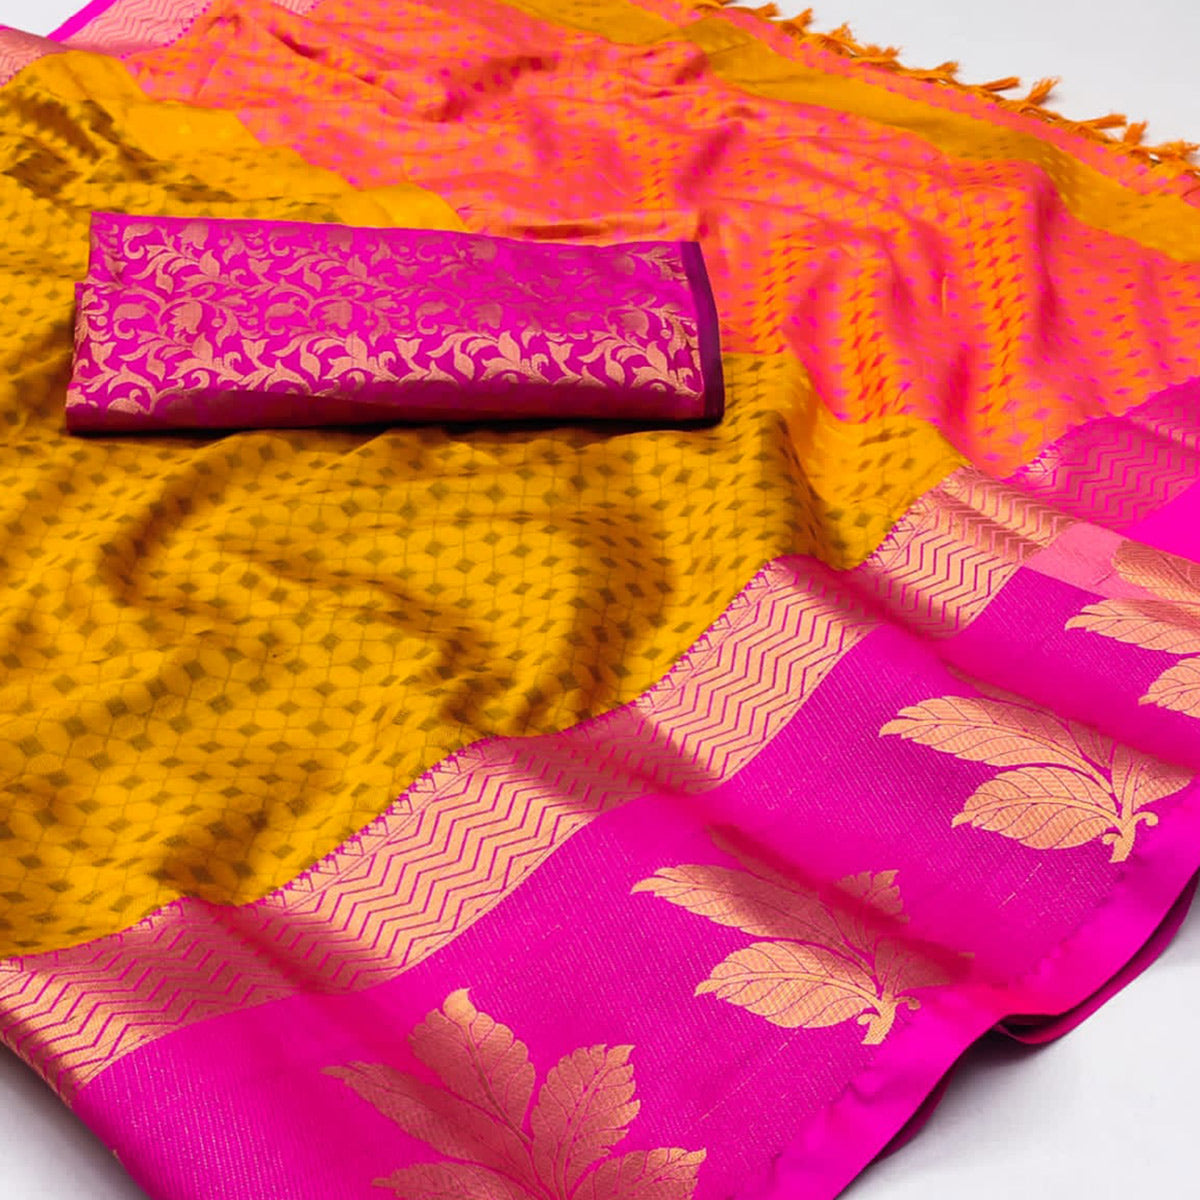 Gold Woven Cotton Silk Saree With Tassels